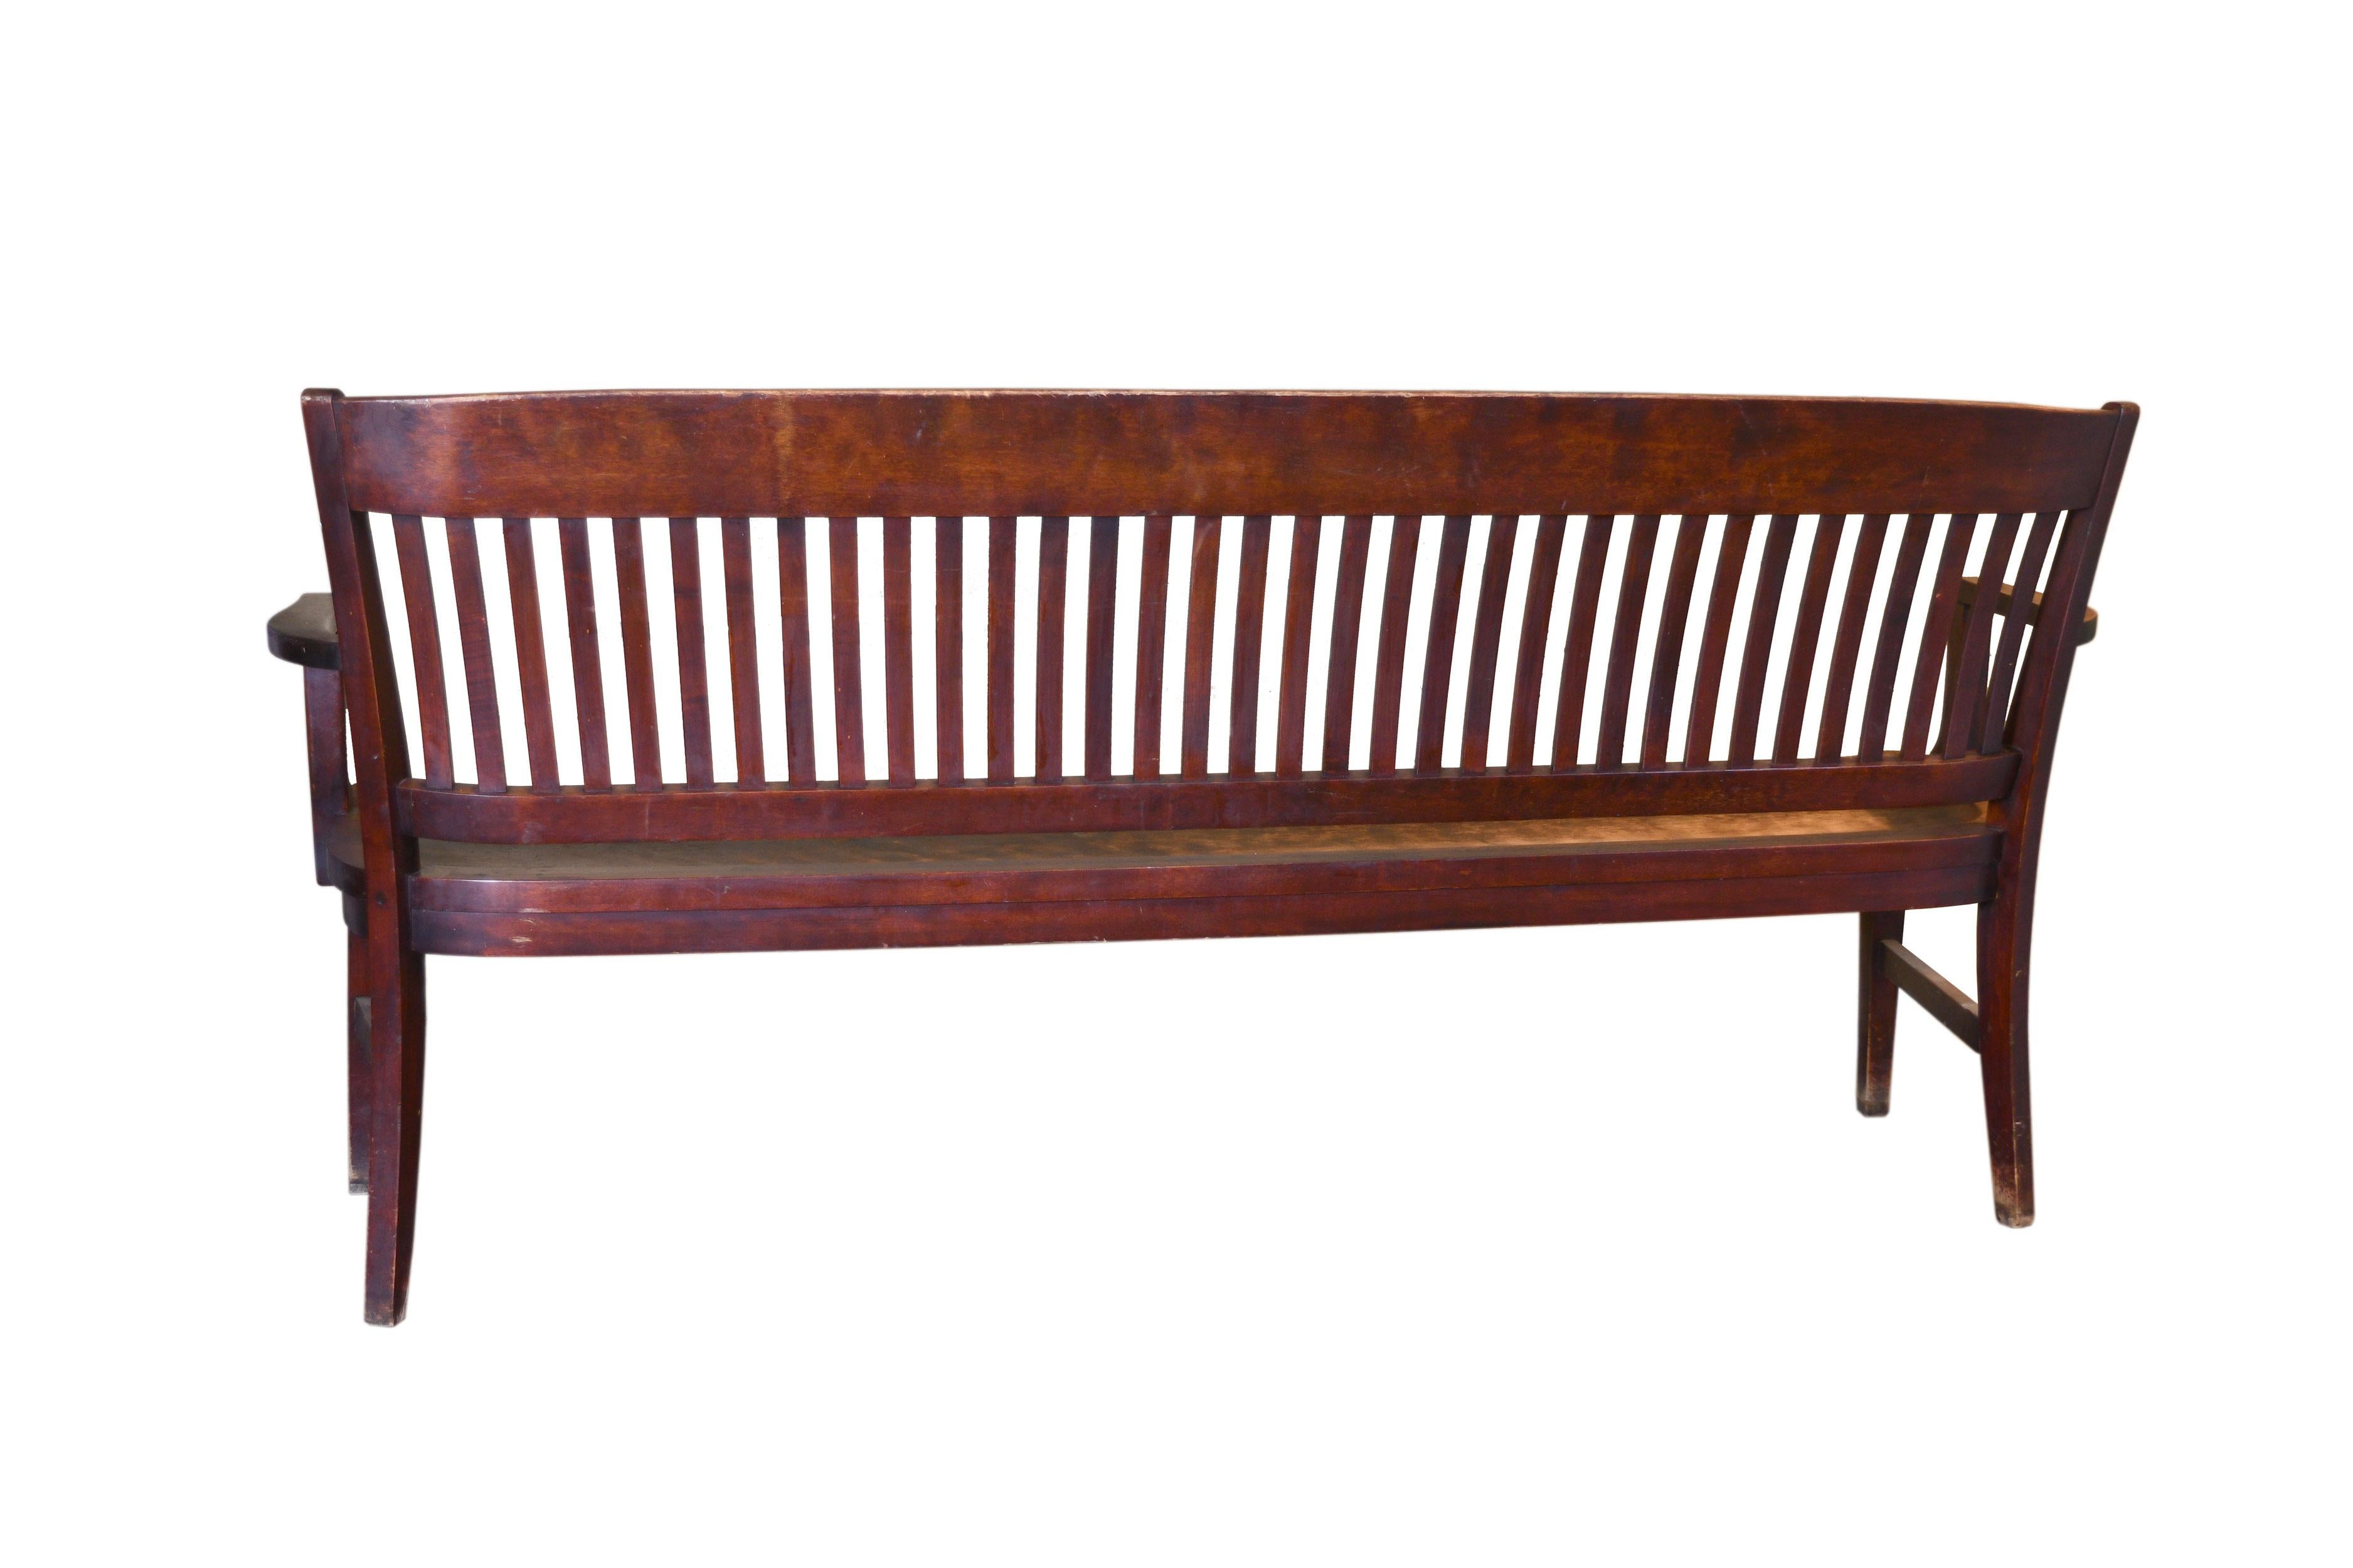 This handsomely crafted square back courtroom bench will add a warmth of character to any space!